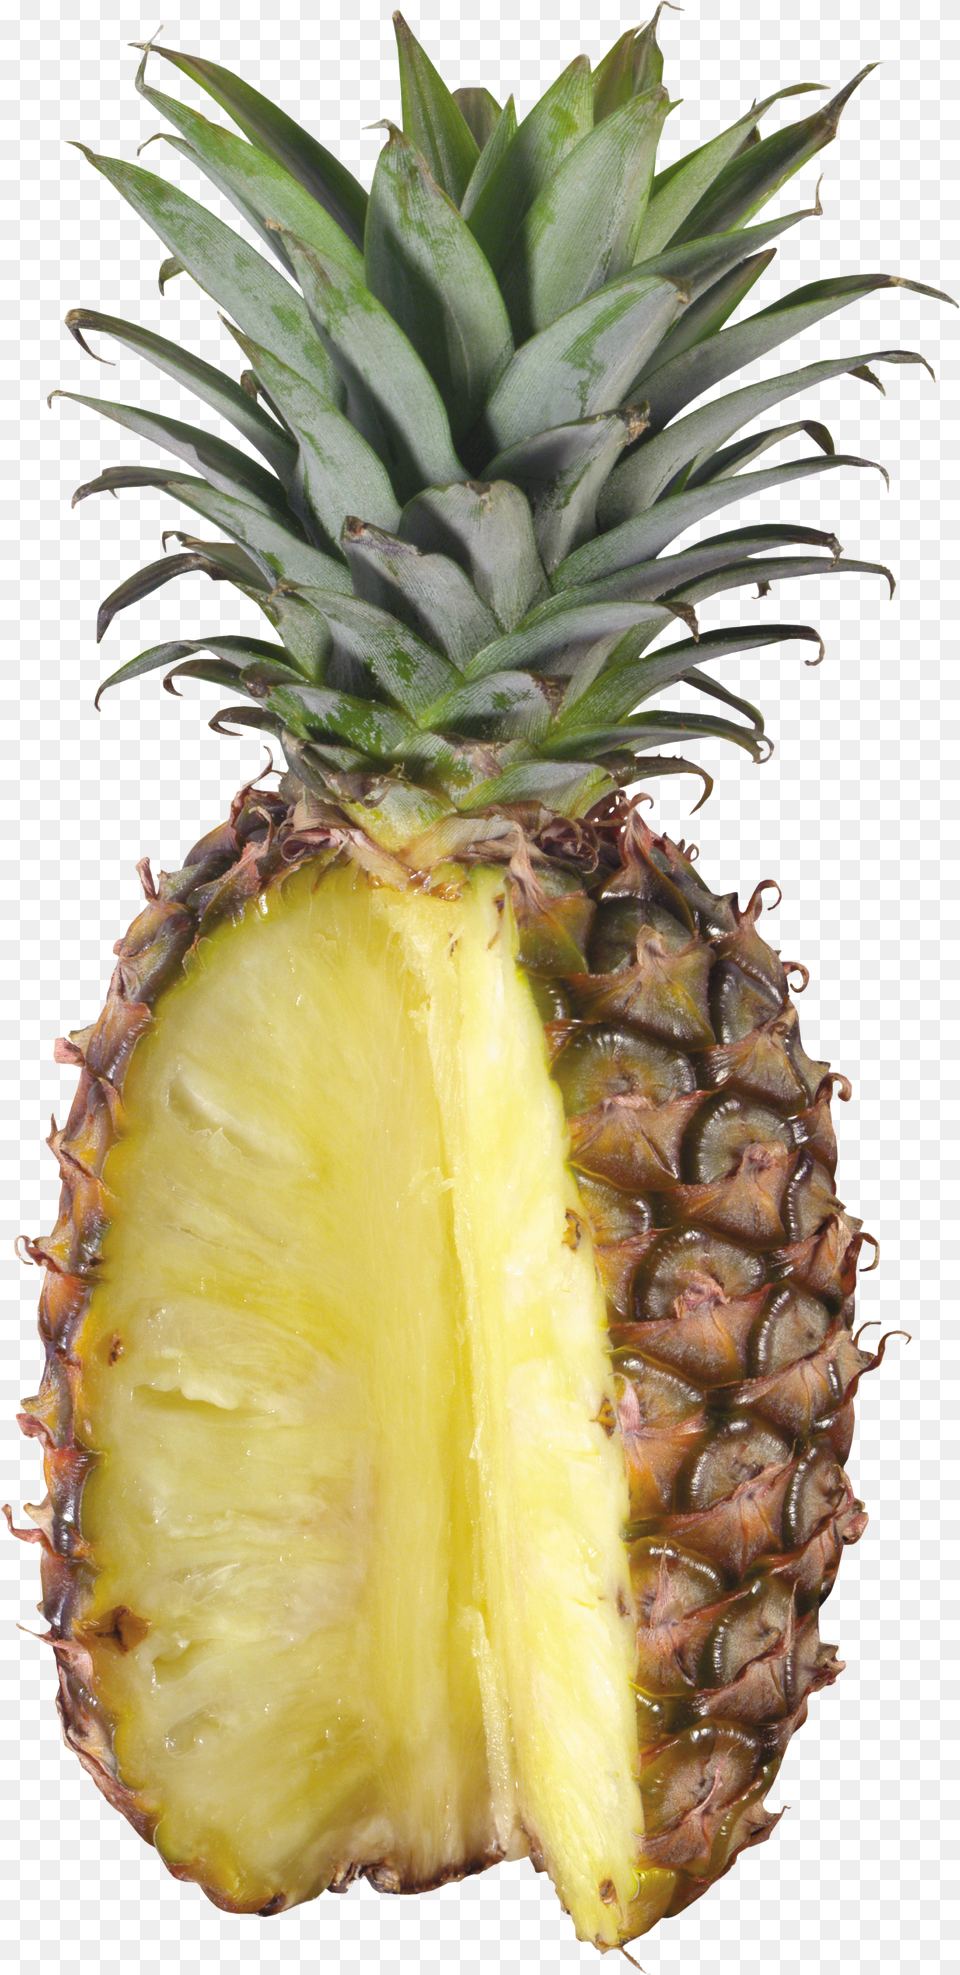 Pineapple Images Pictures Download Kenwood Juice Extractor Free Png